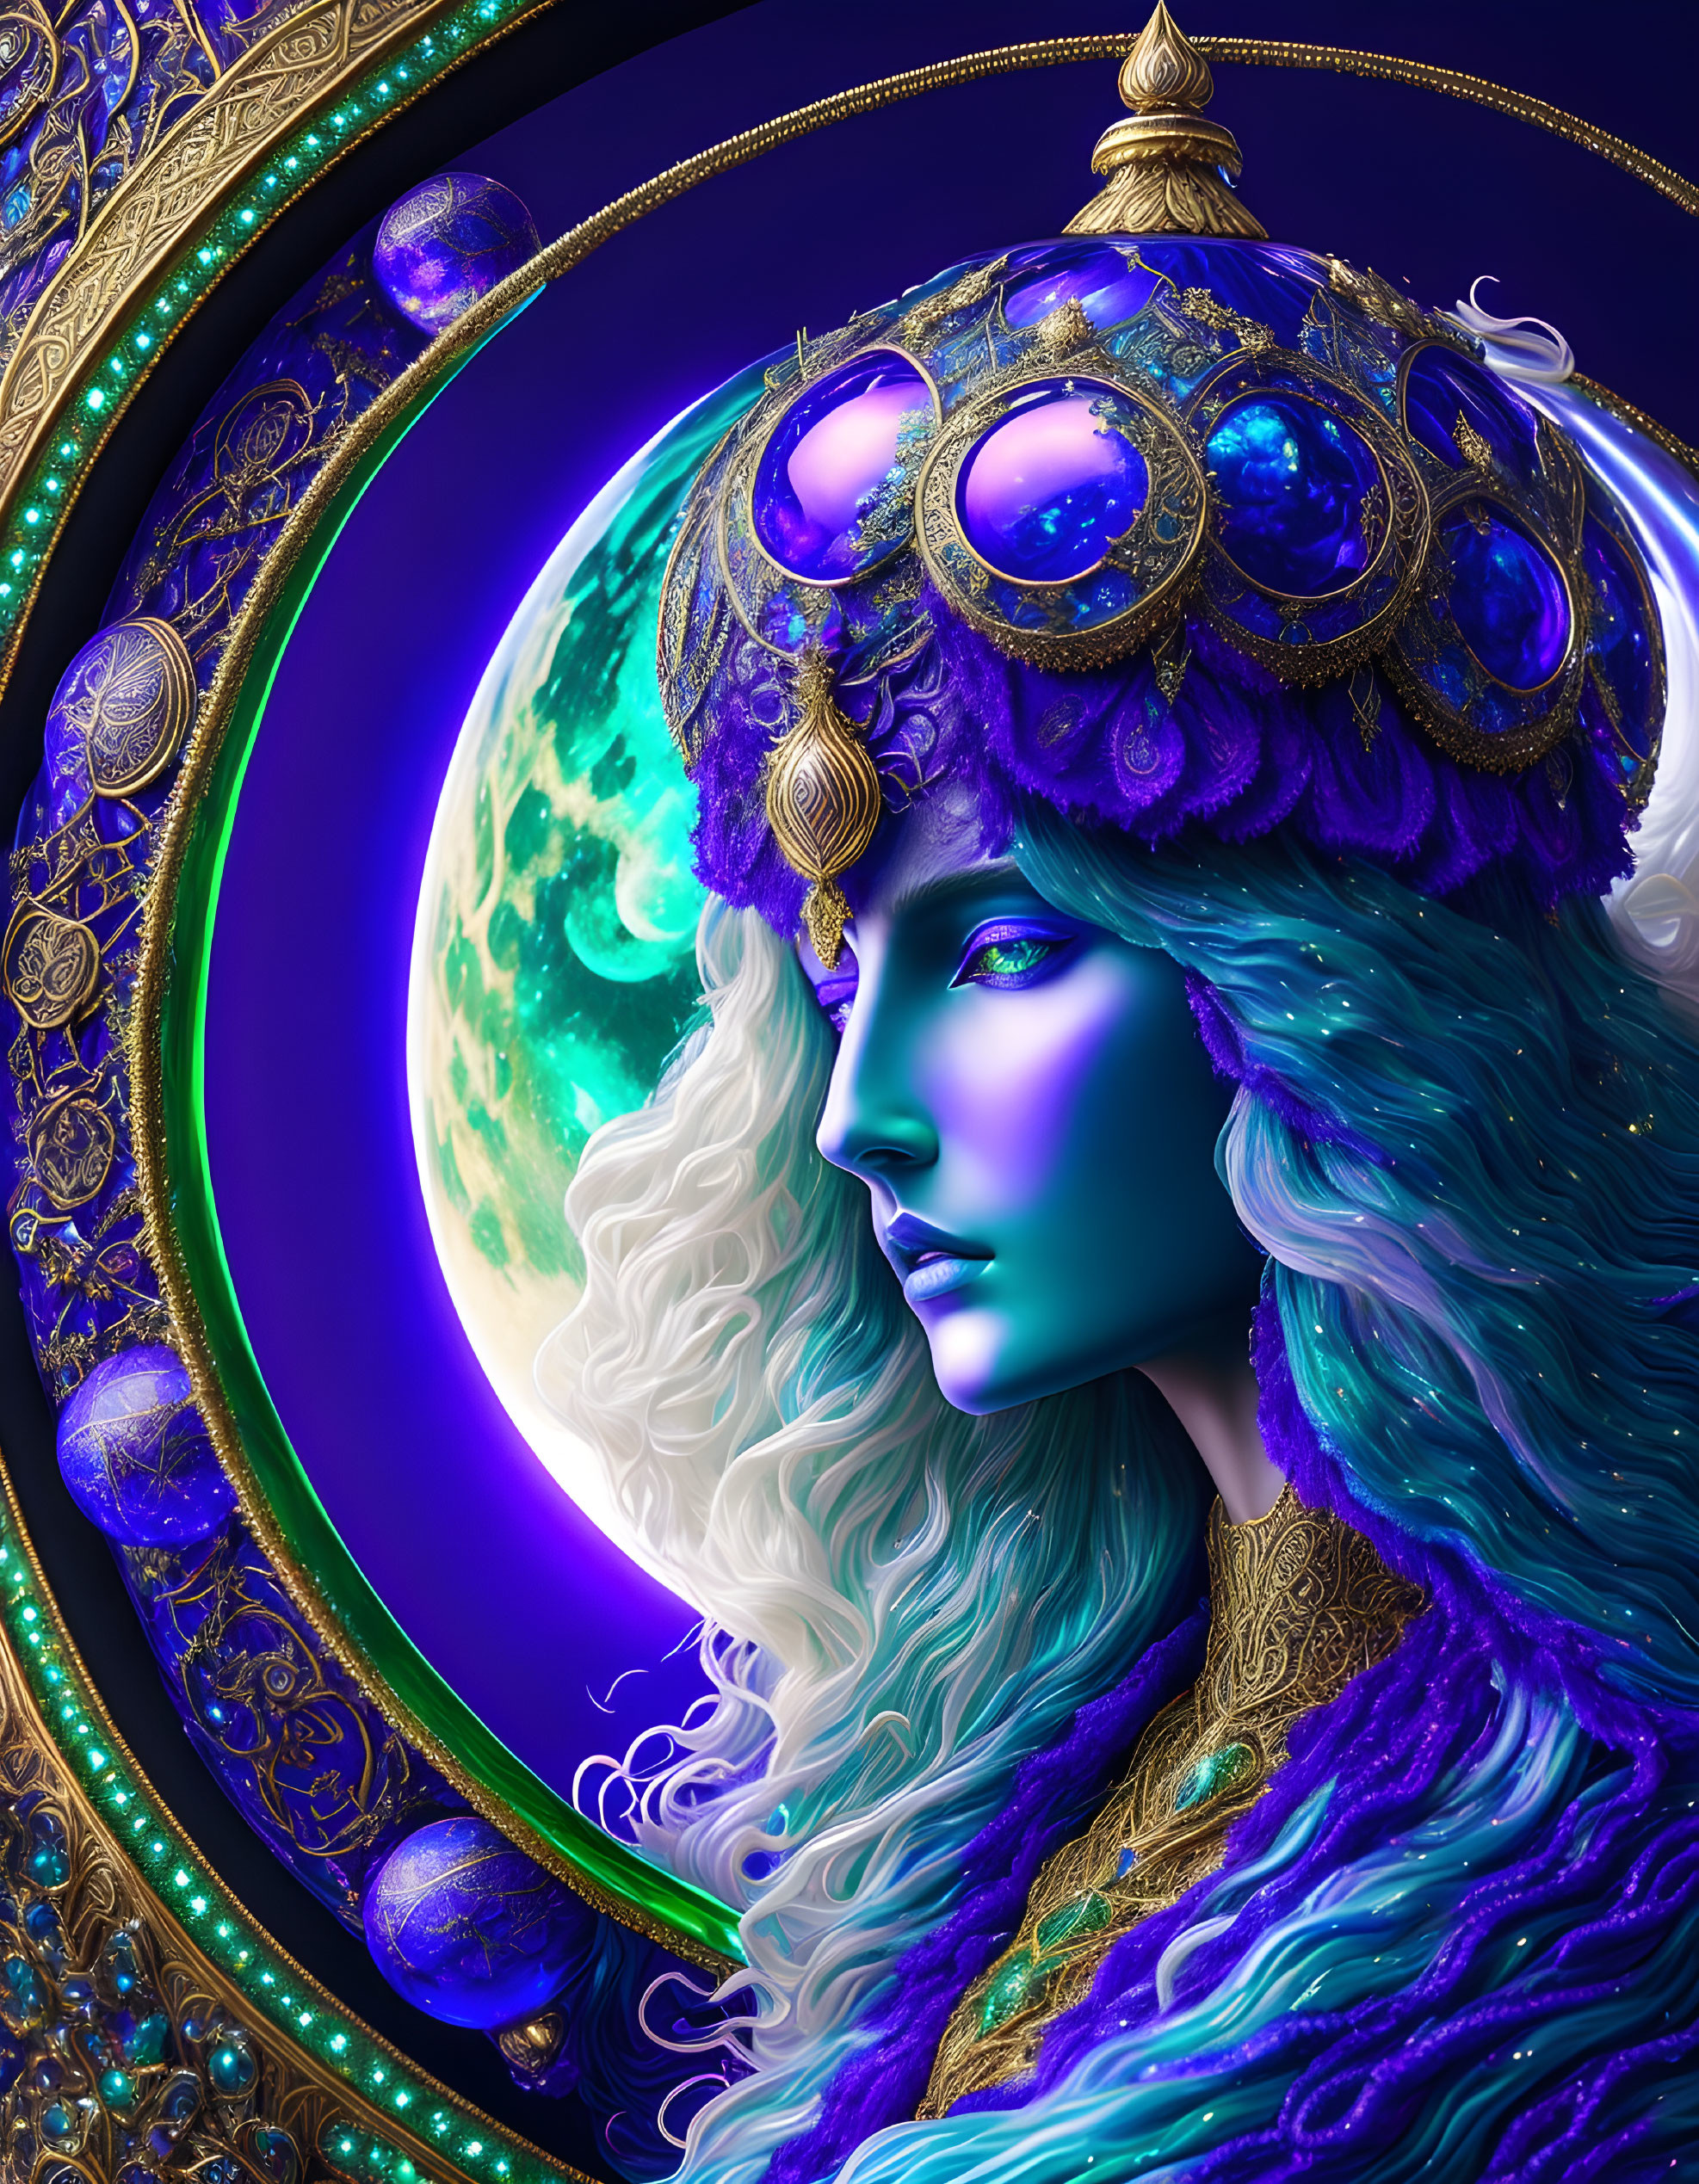 Detailed digital artwork of mystical female figure with blue skin and white hair, wearing golden headdress and jewelry